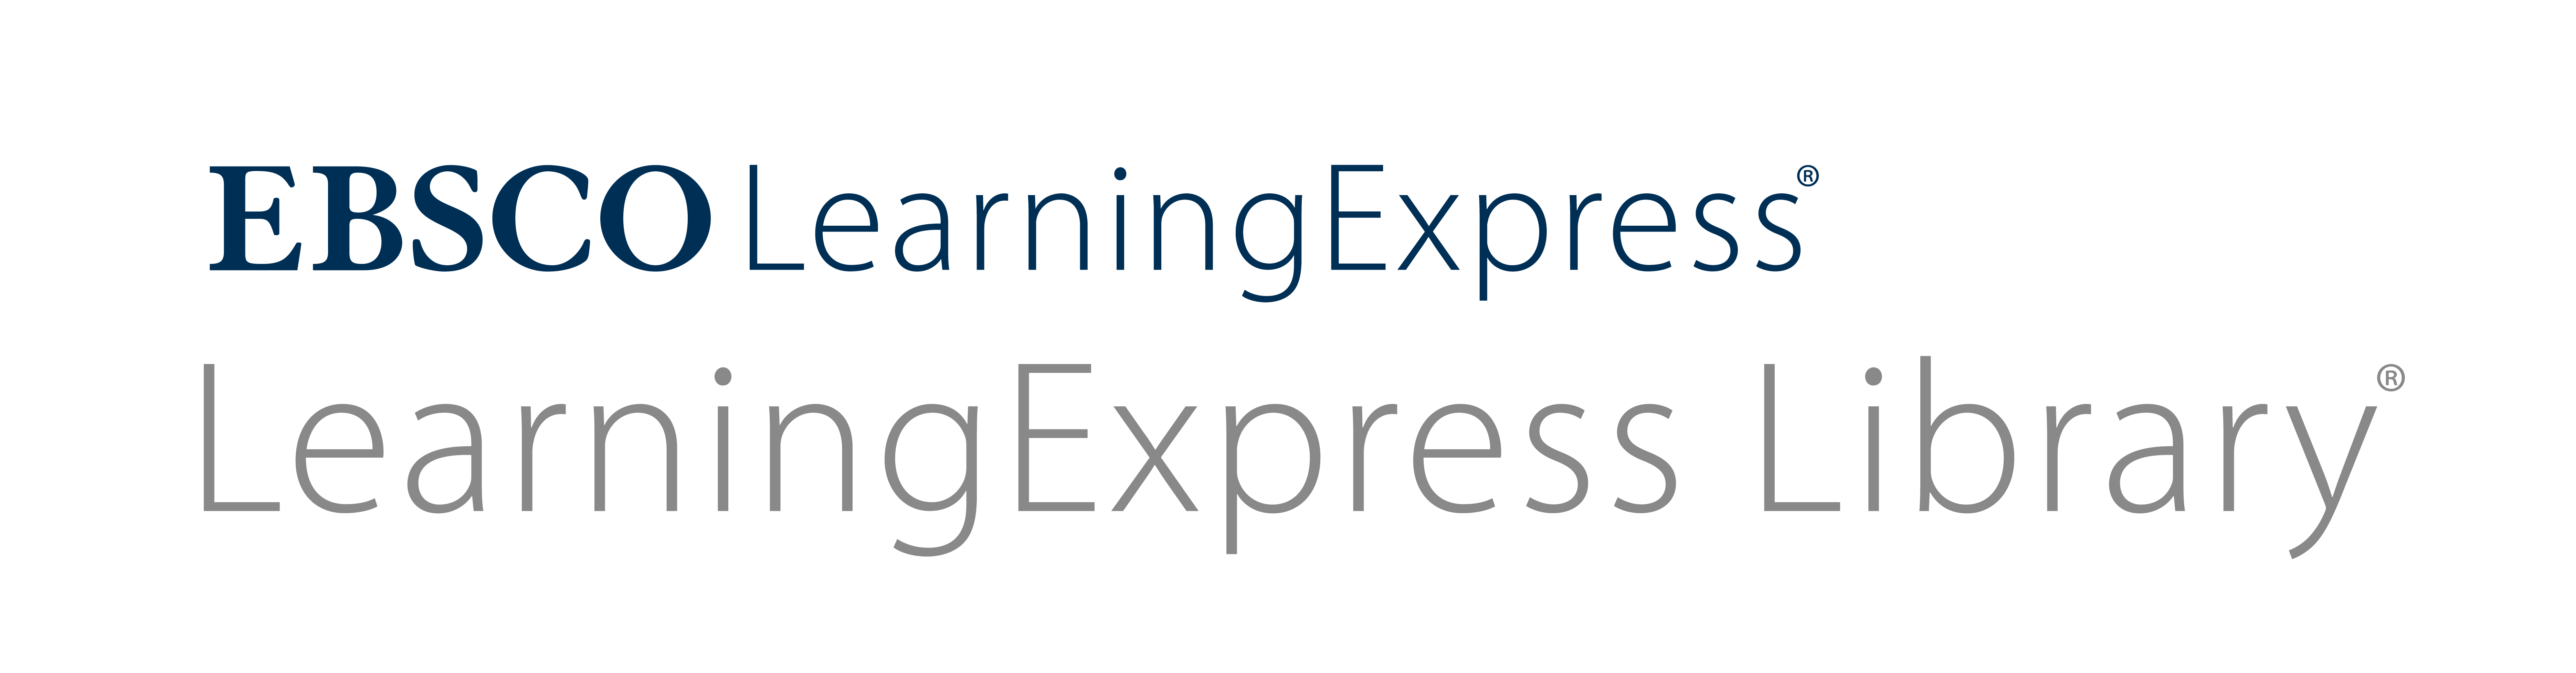 EBSCOLearningExpress_Product_Logos_LearningExpress-Library-Screen.jpg